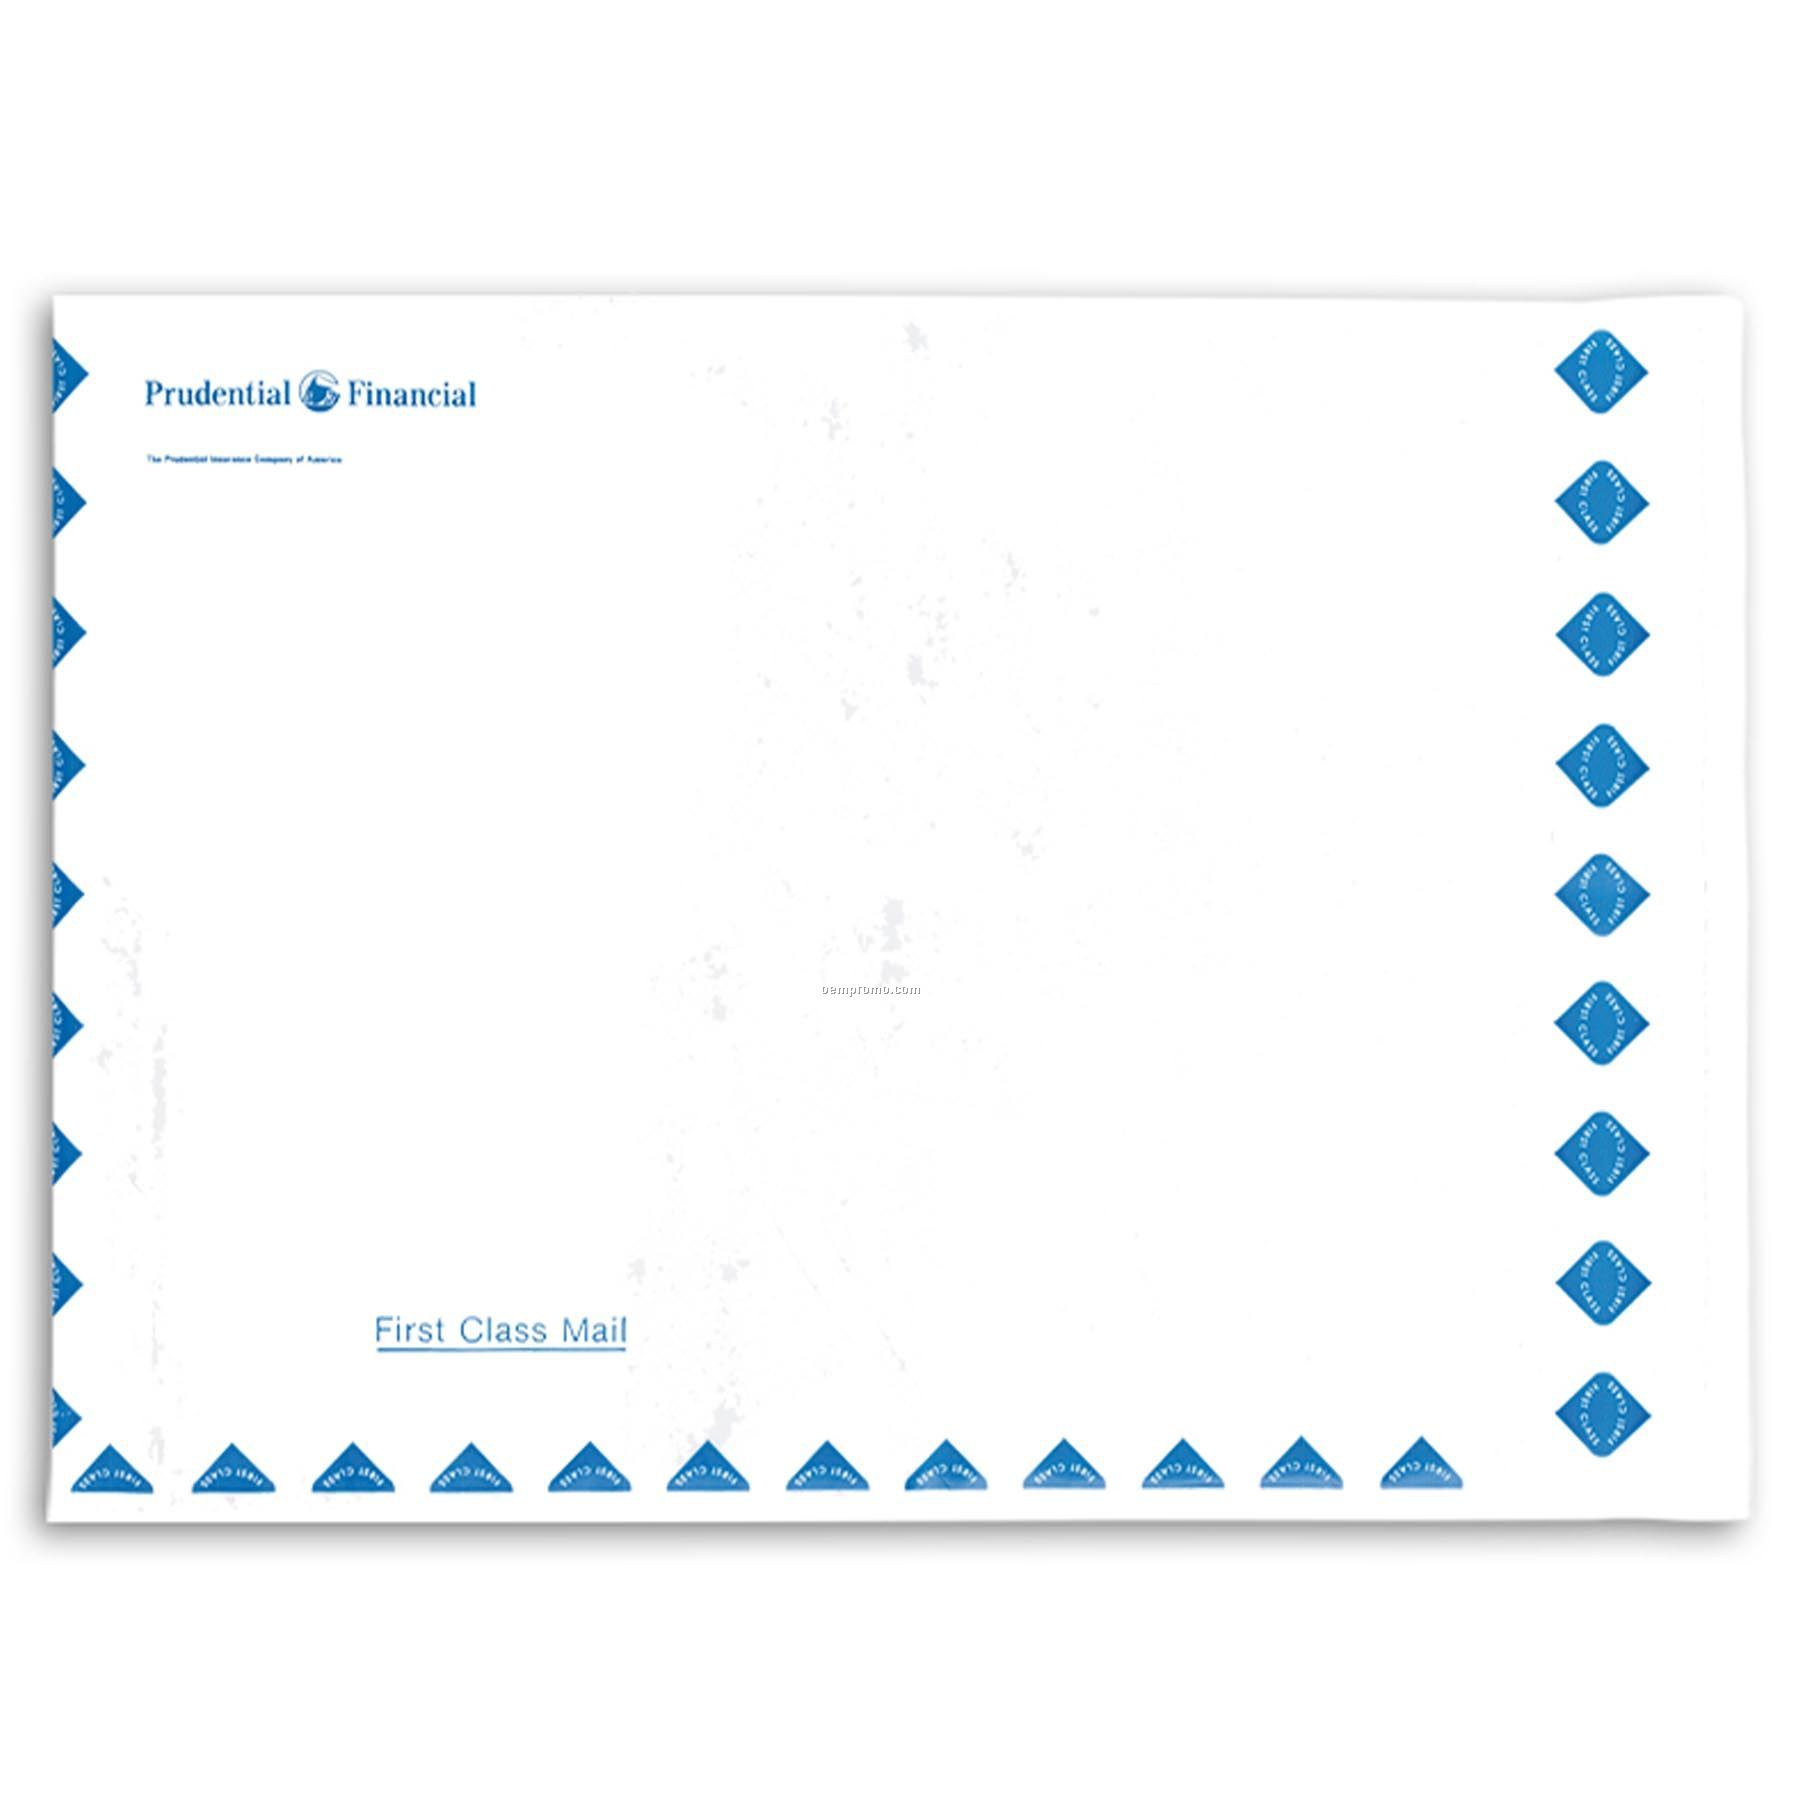 Co-extruded Mailer Envelope (13"X18"+3")